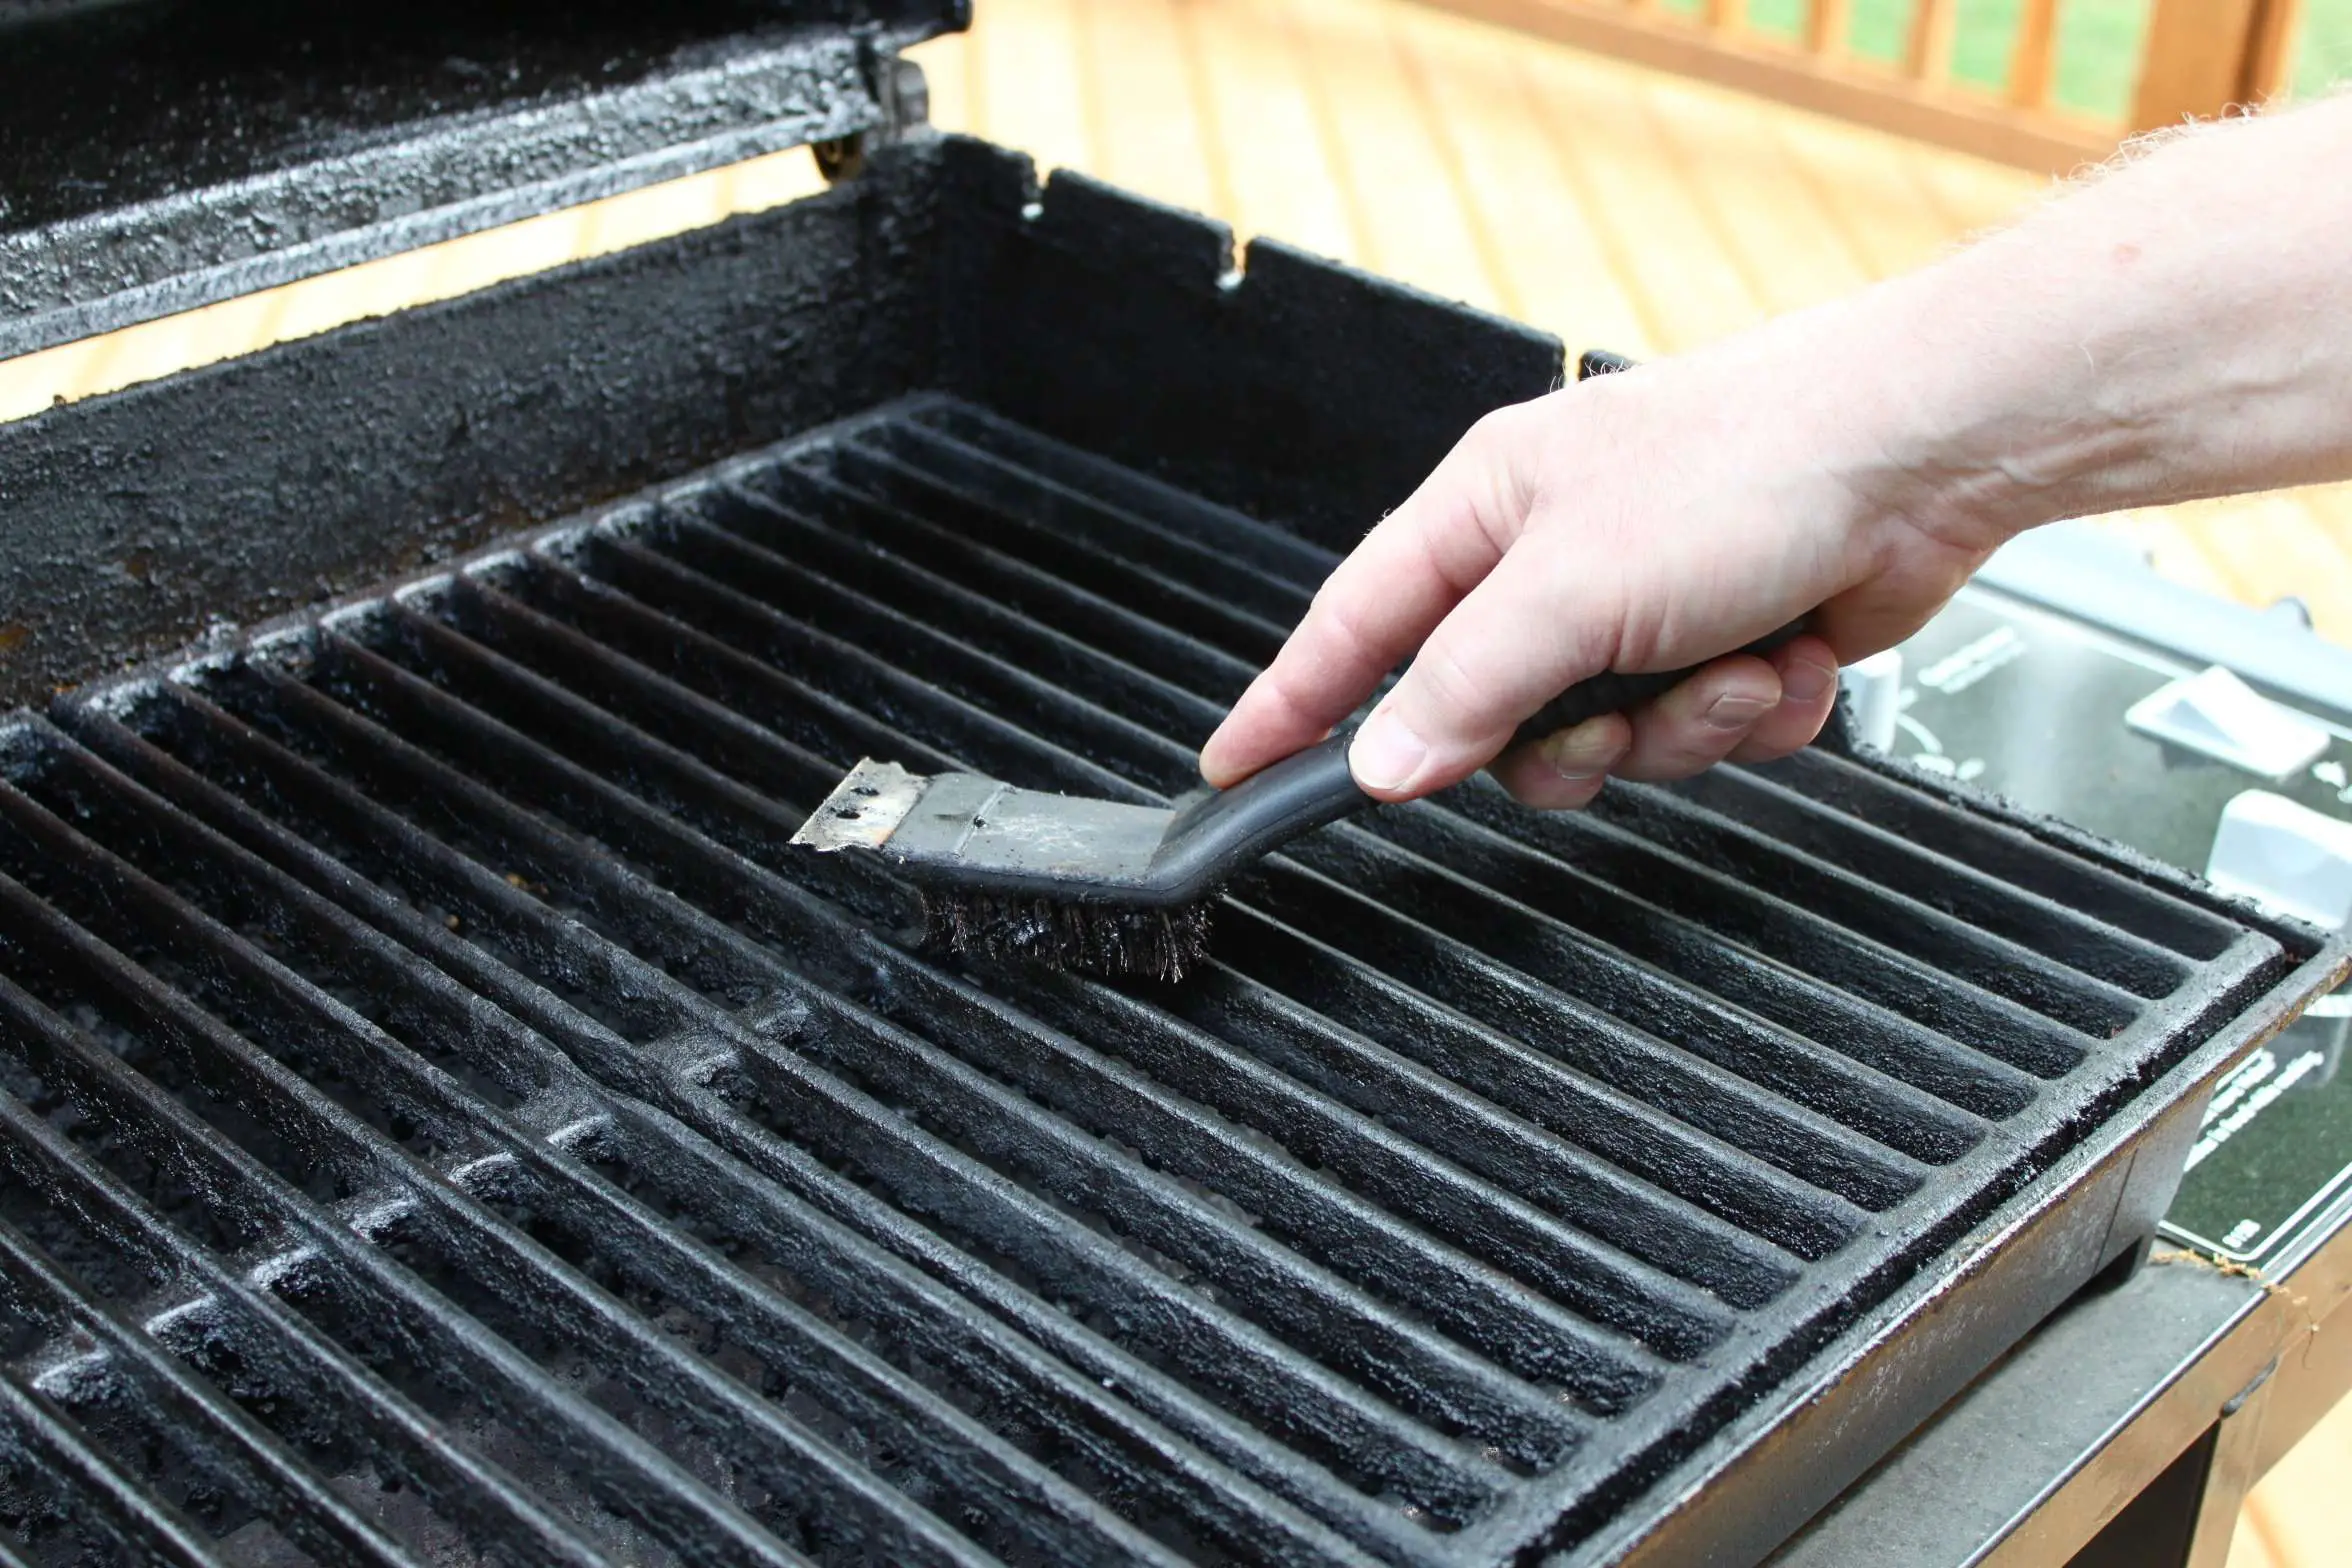 Healthy grilling tips for Memorial Day